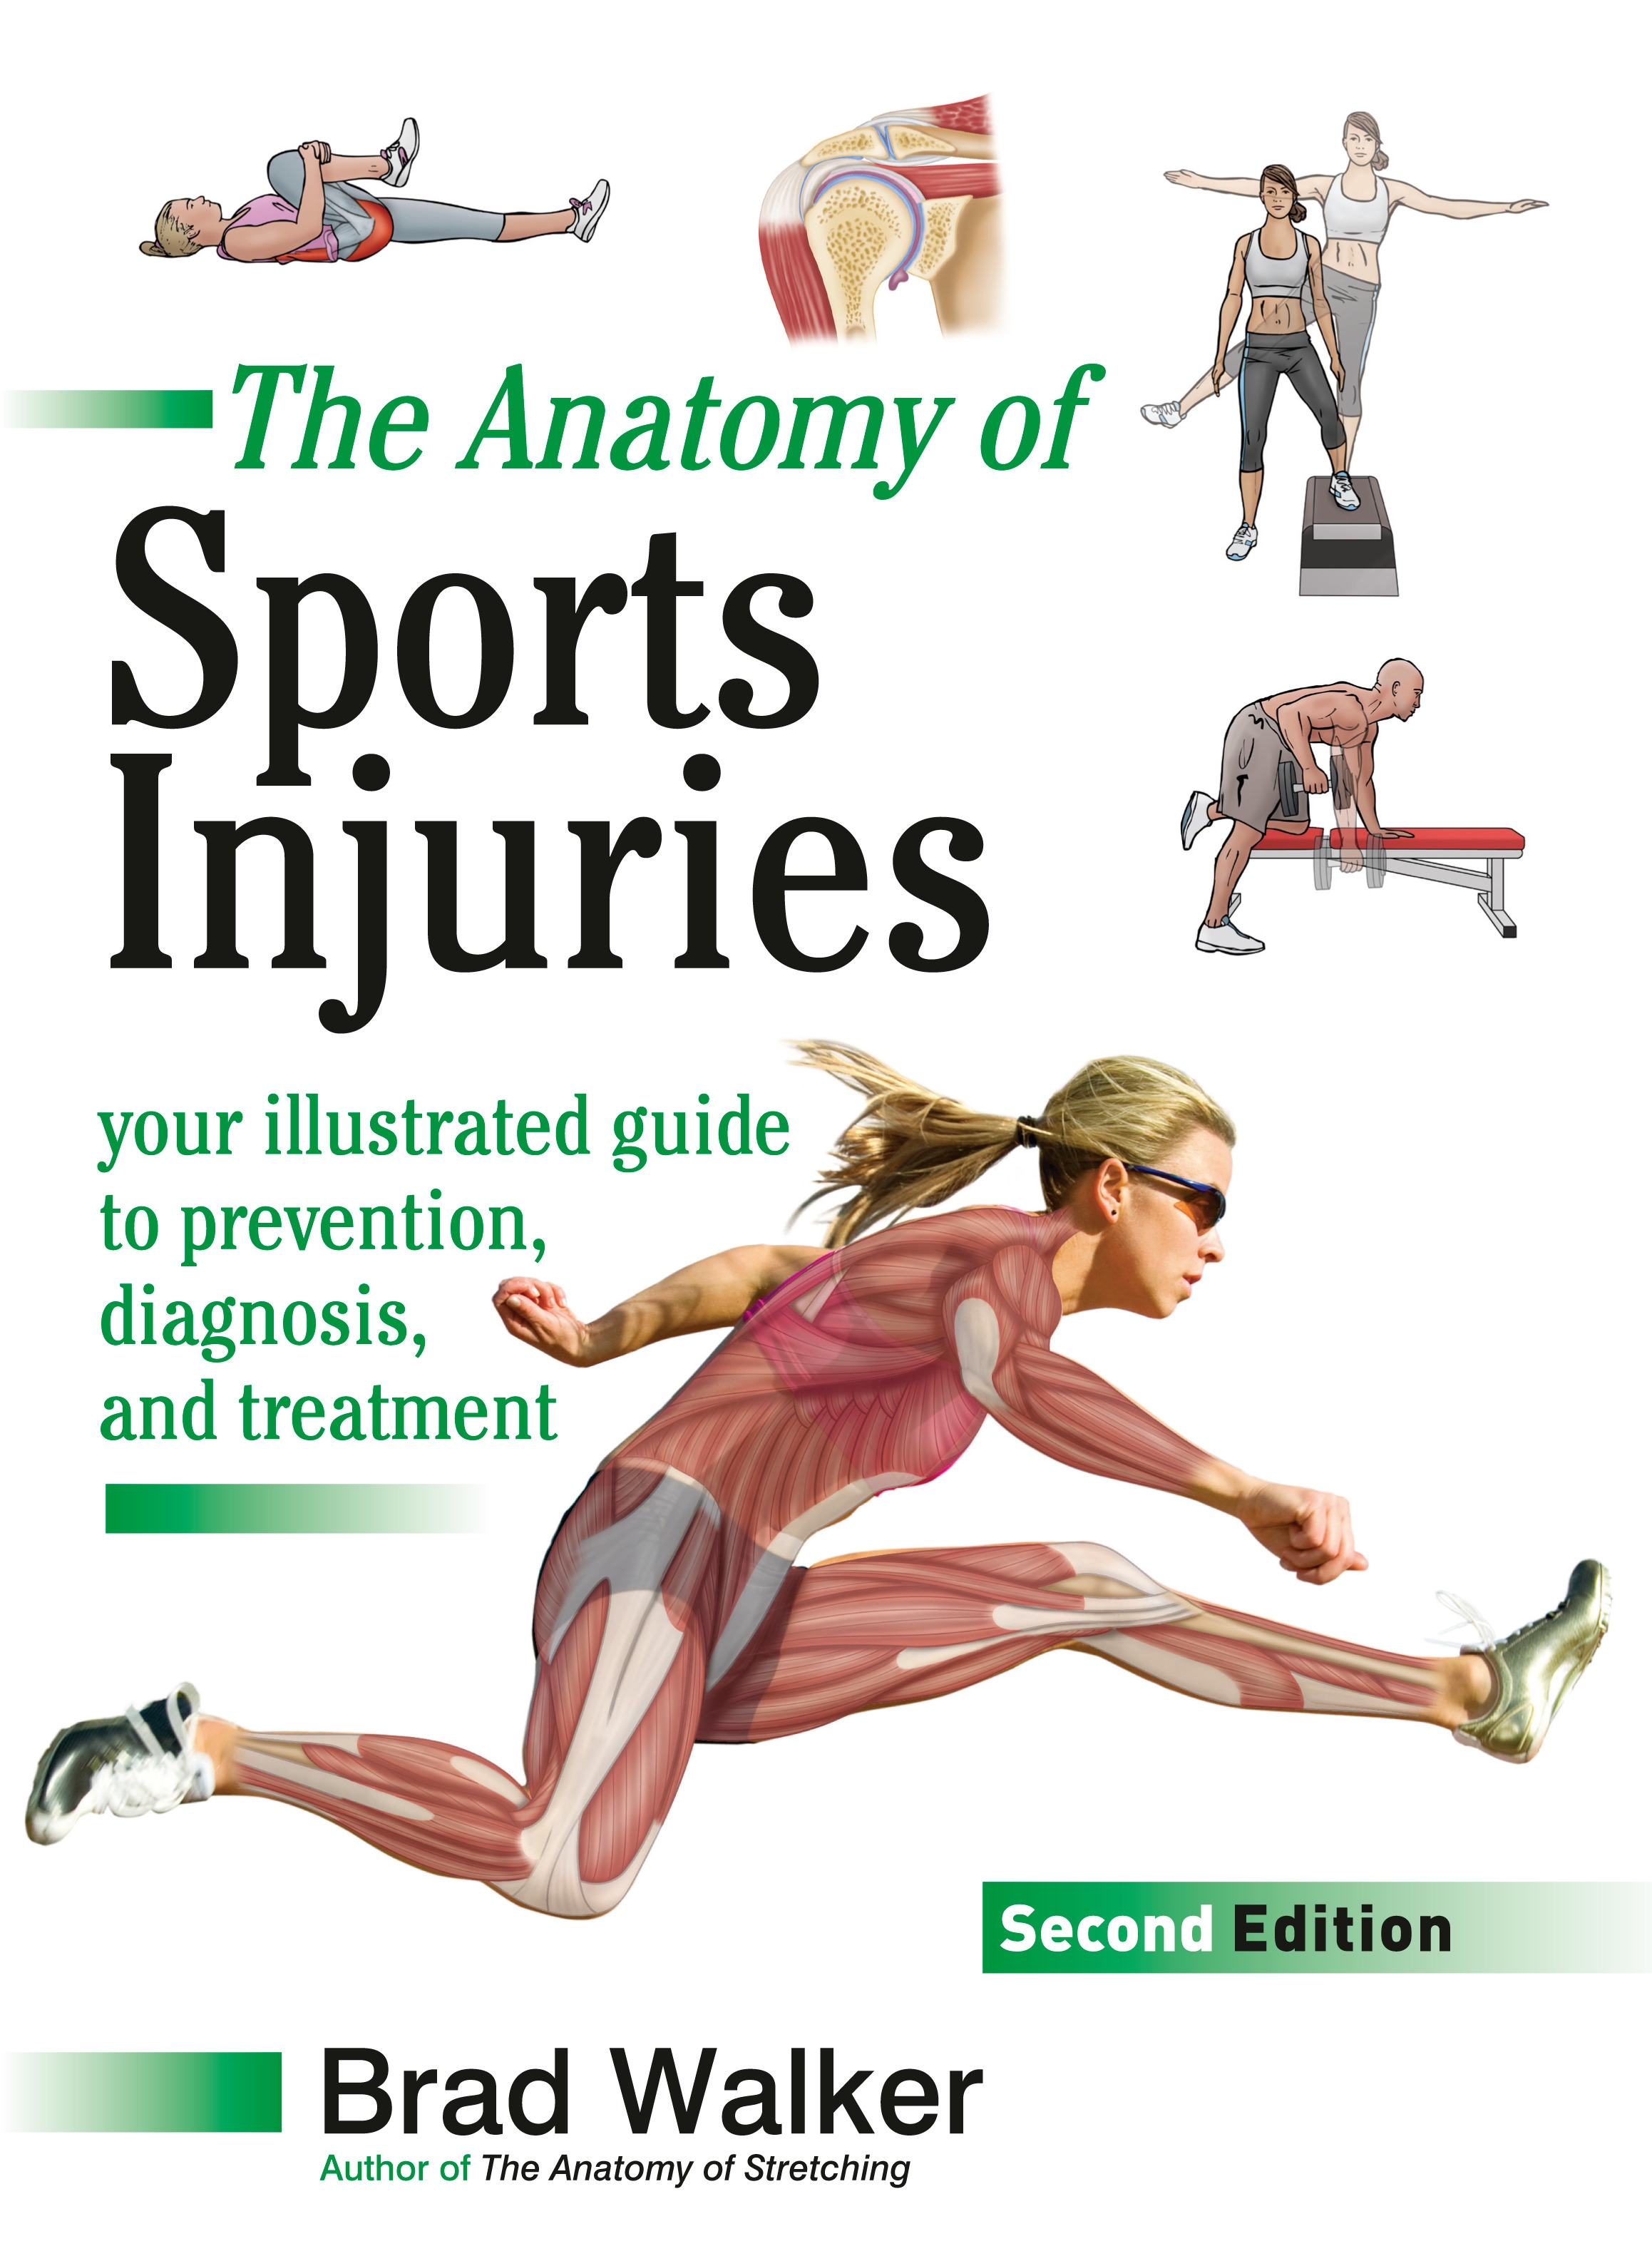 sports injuries assignment 2